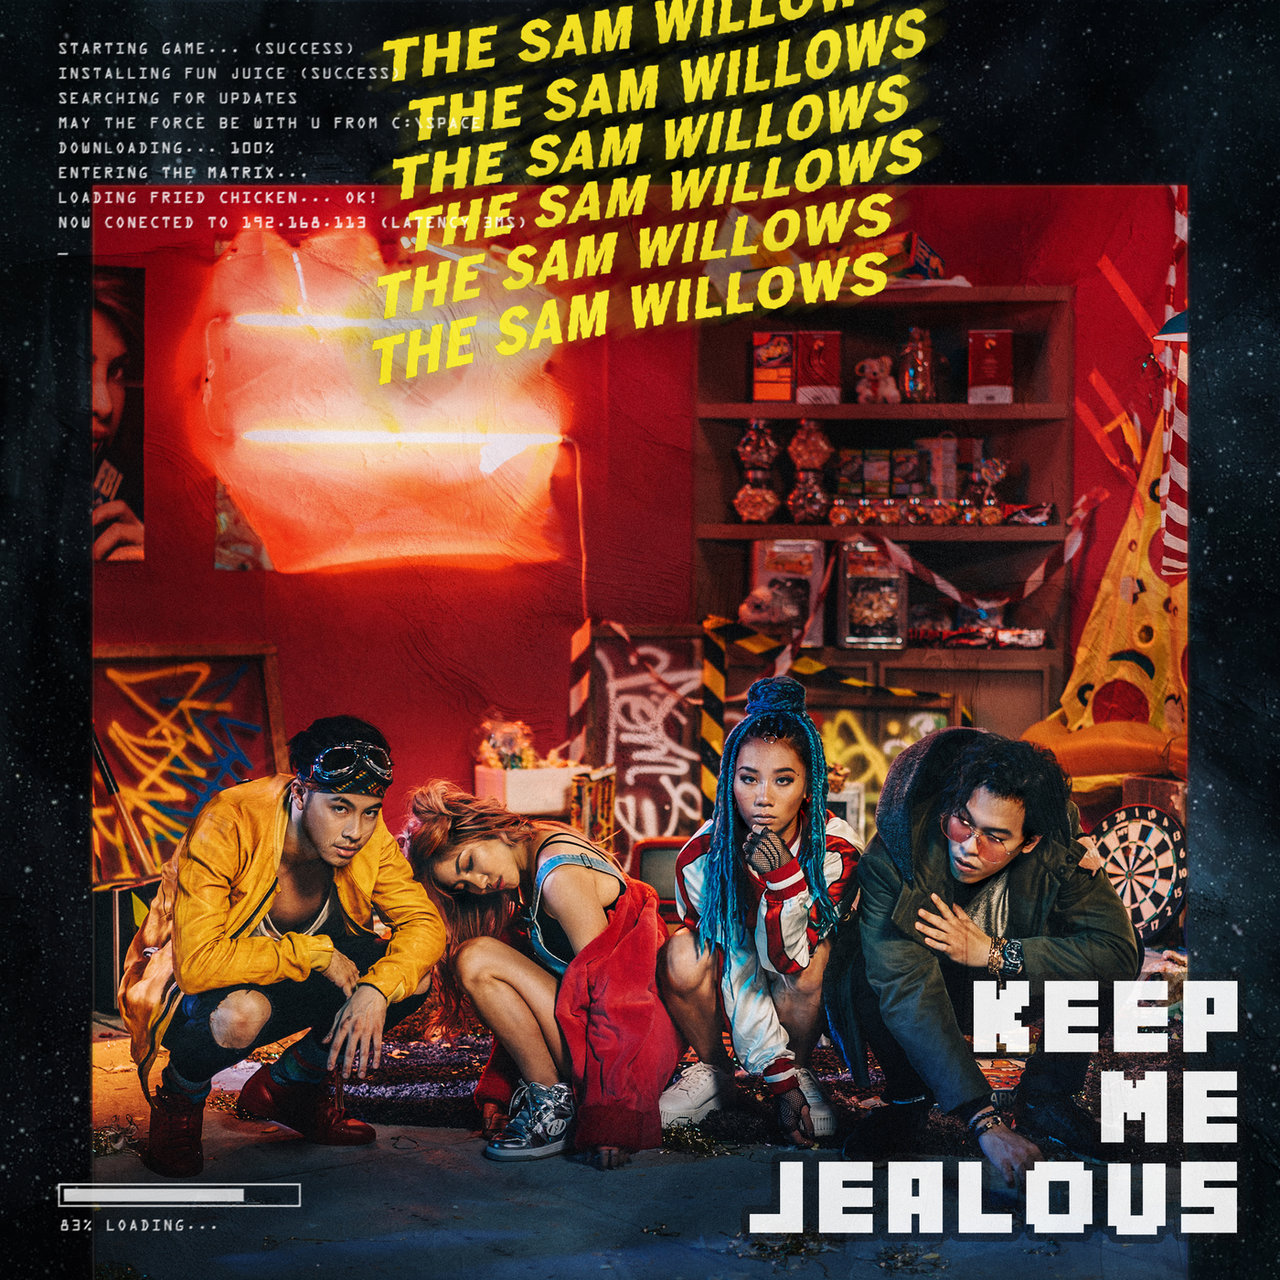 The Sam Willows Keep Me Jealous cover artwork